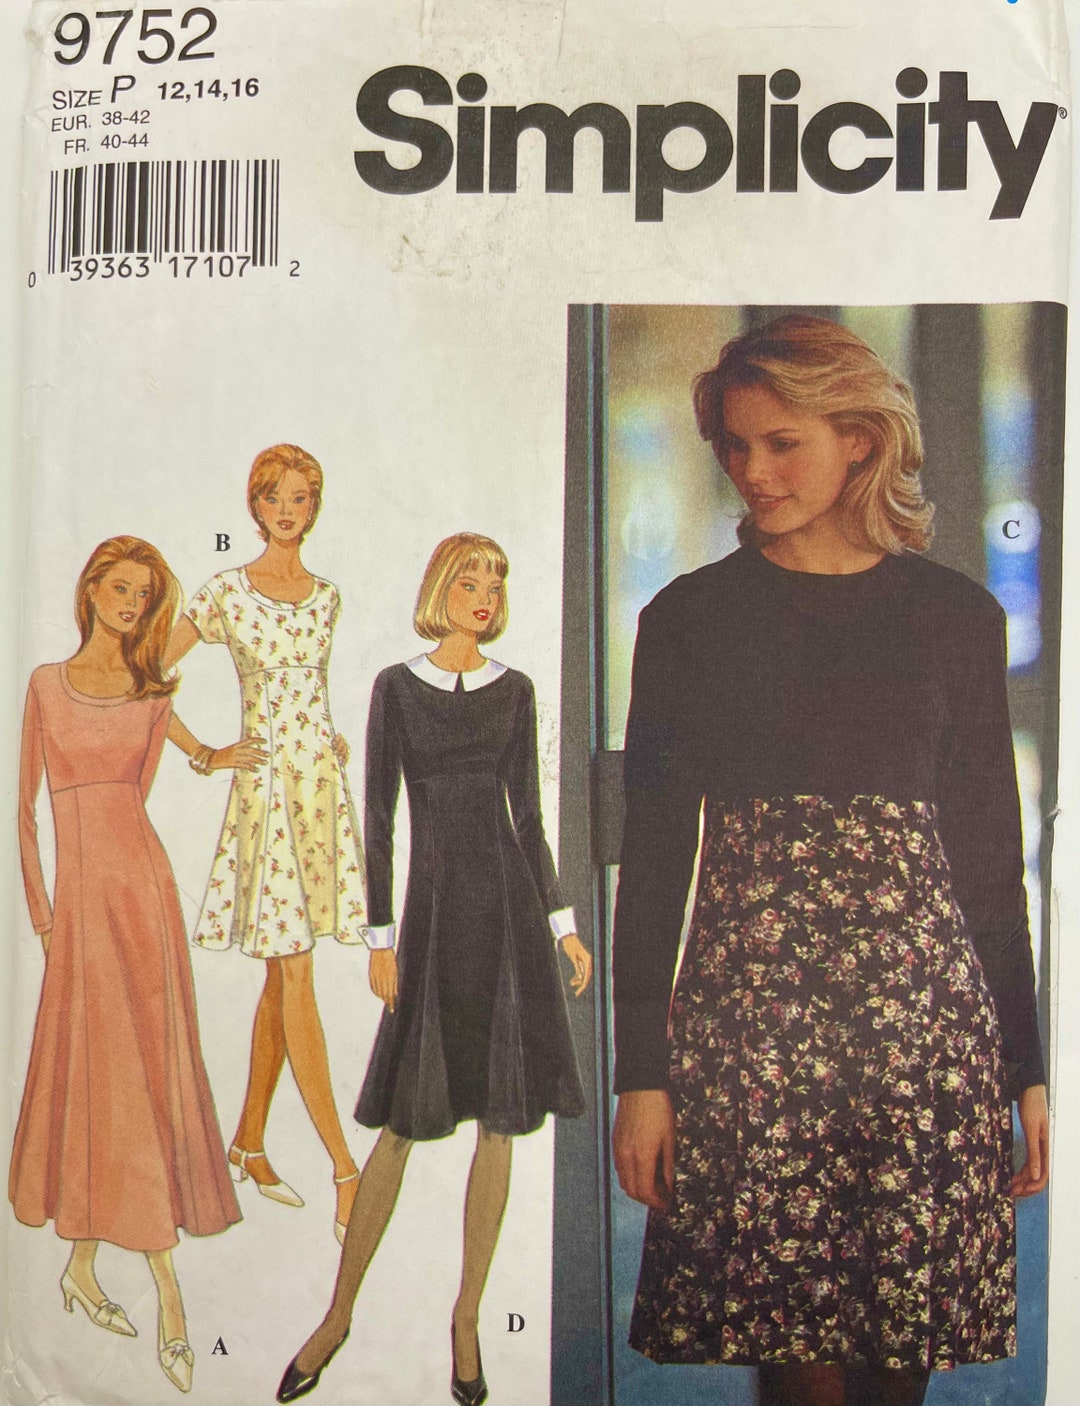 Simplicity 9752. A Classic Silhouette Dress Sewing Pattern 4 - Etsy